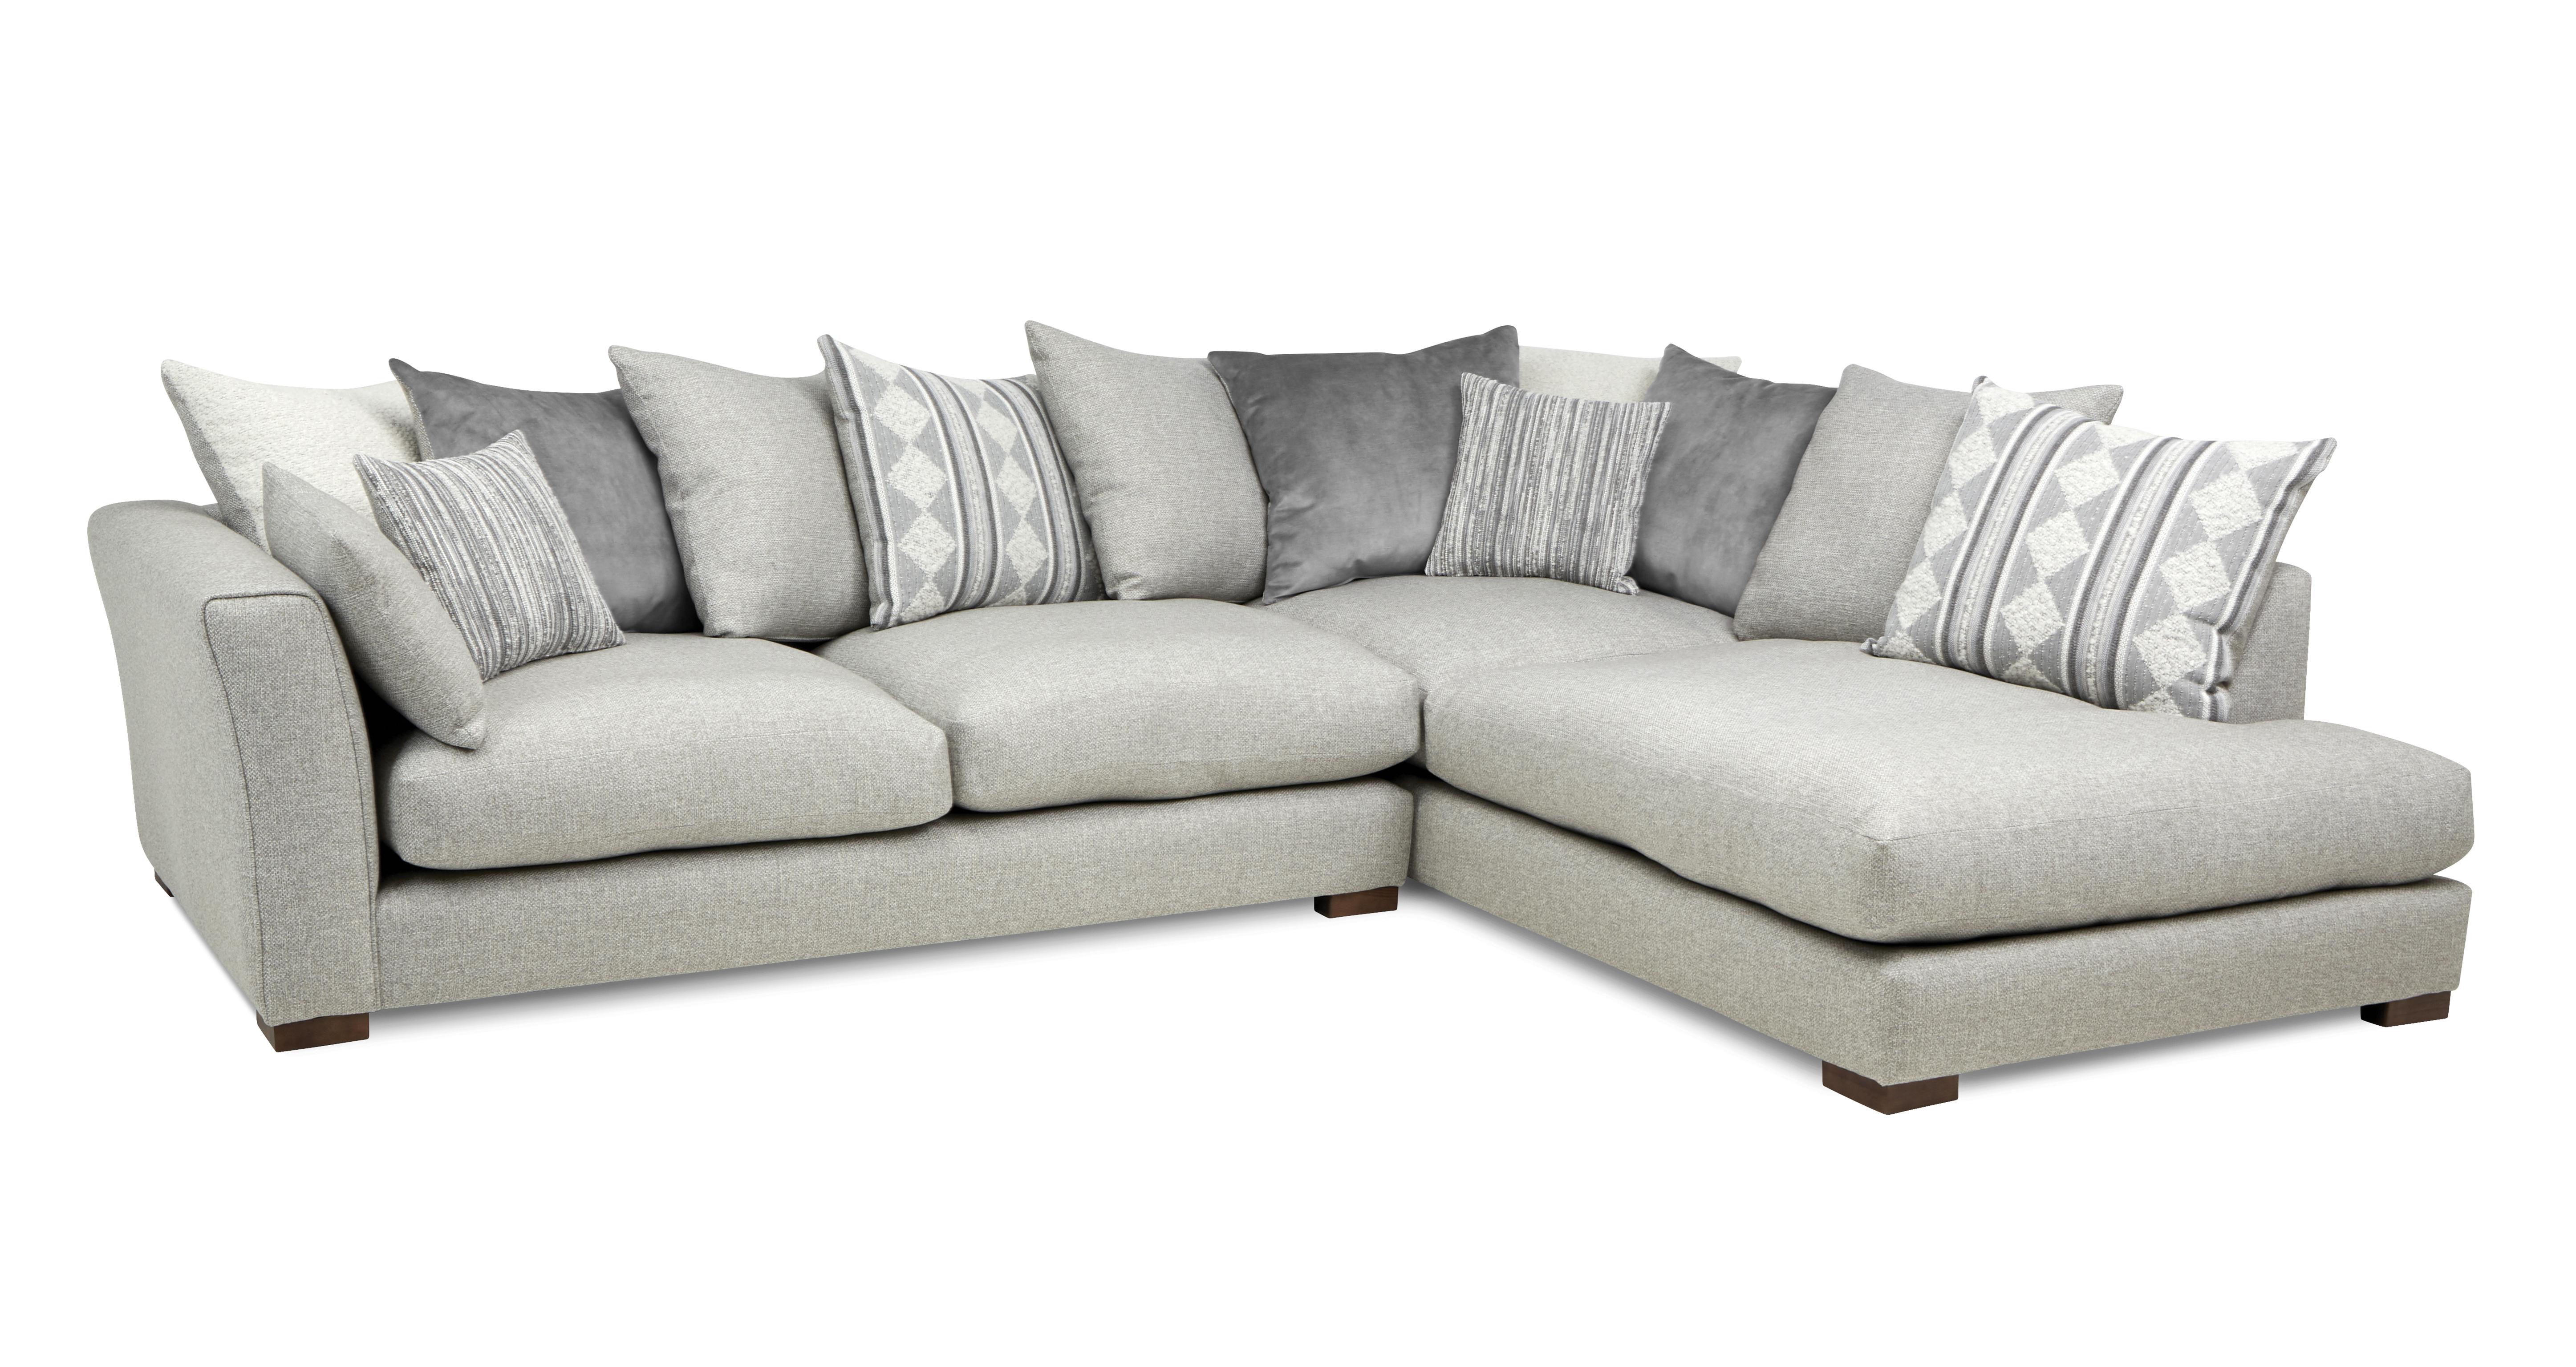 DFS Corner Sofa 4 Seater (right hand facing). Pre-owned.